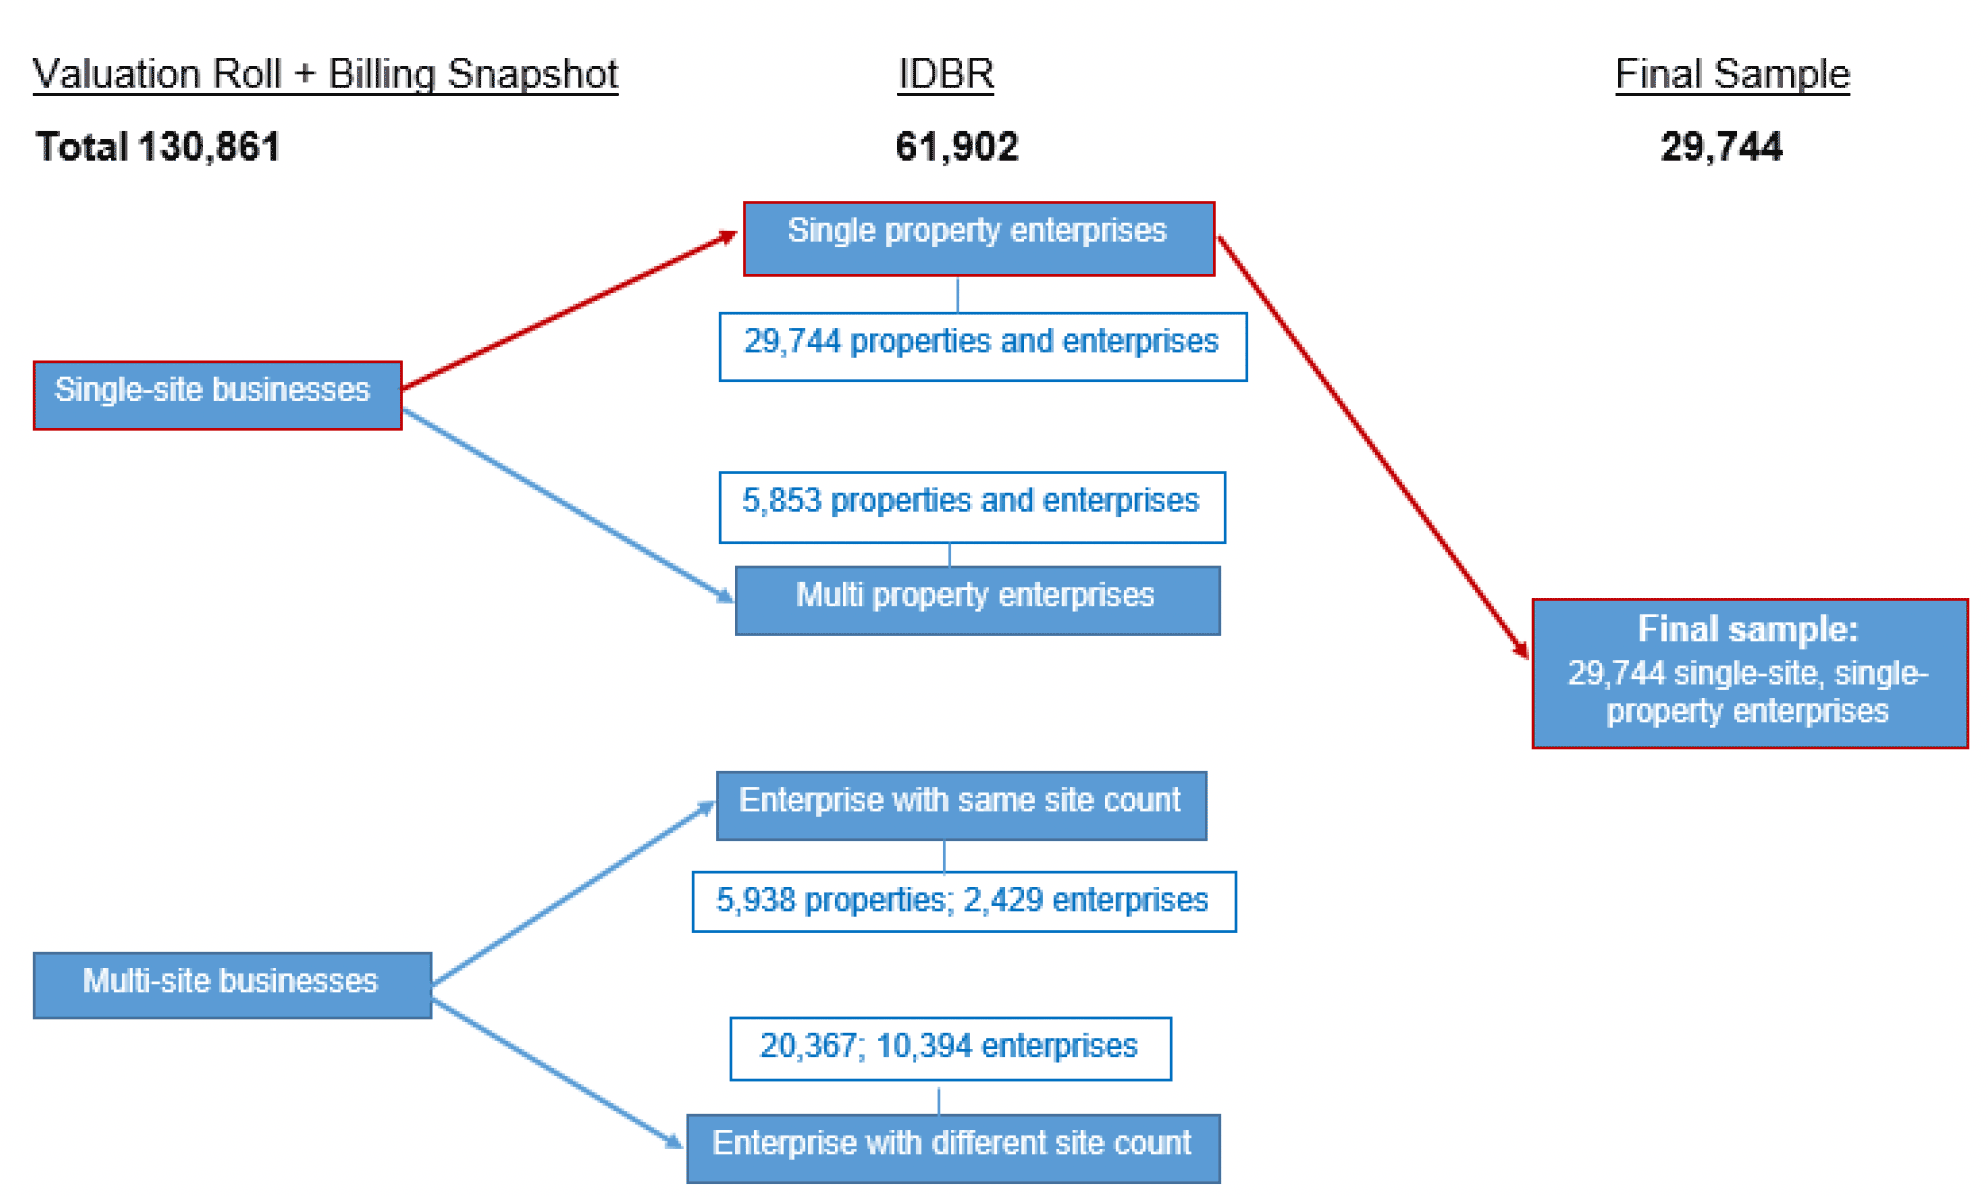 A flow diagram showing the reduction from all businesses on the valuation roll to the single property single site businesses used for analysis, from 130,861 to 29,744.